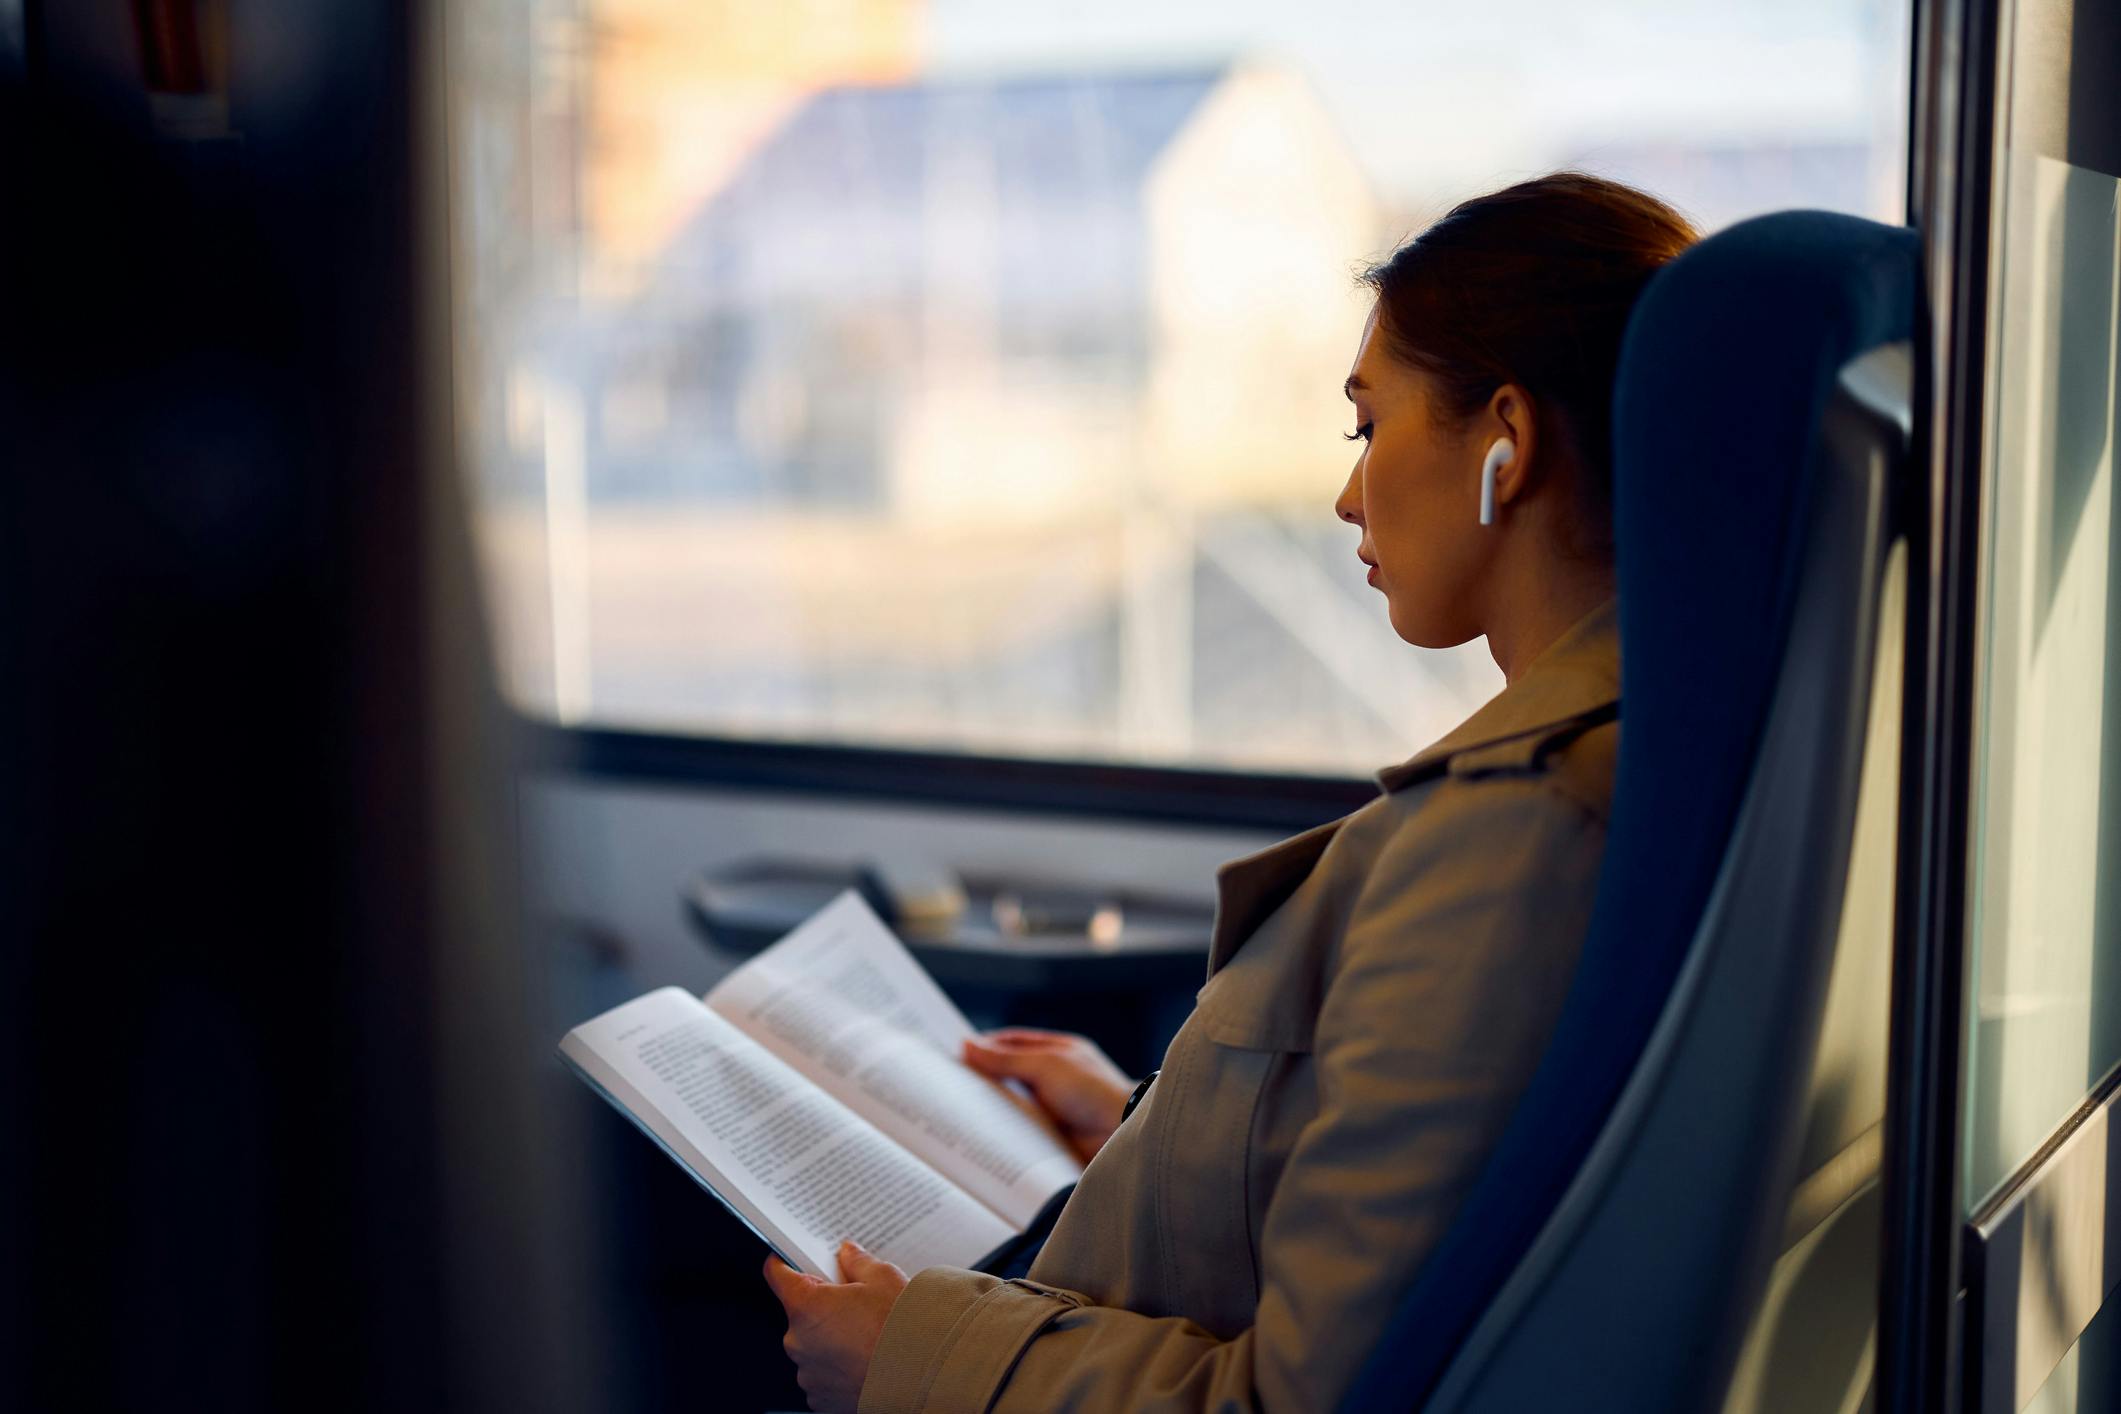 a woman sits on a train with an open book in her hands.